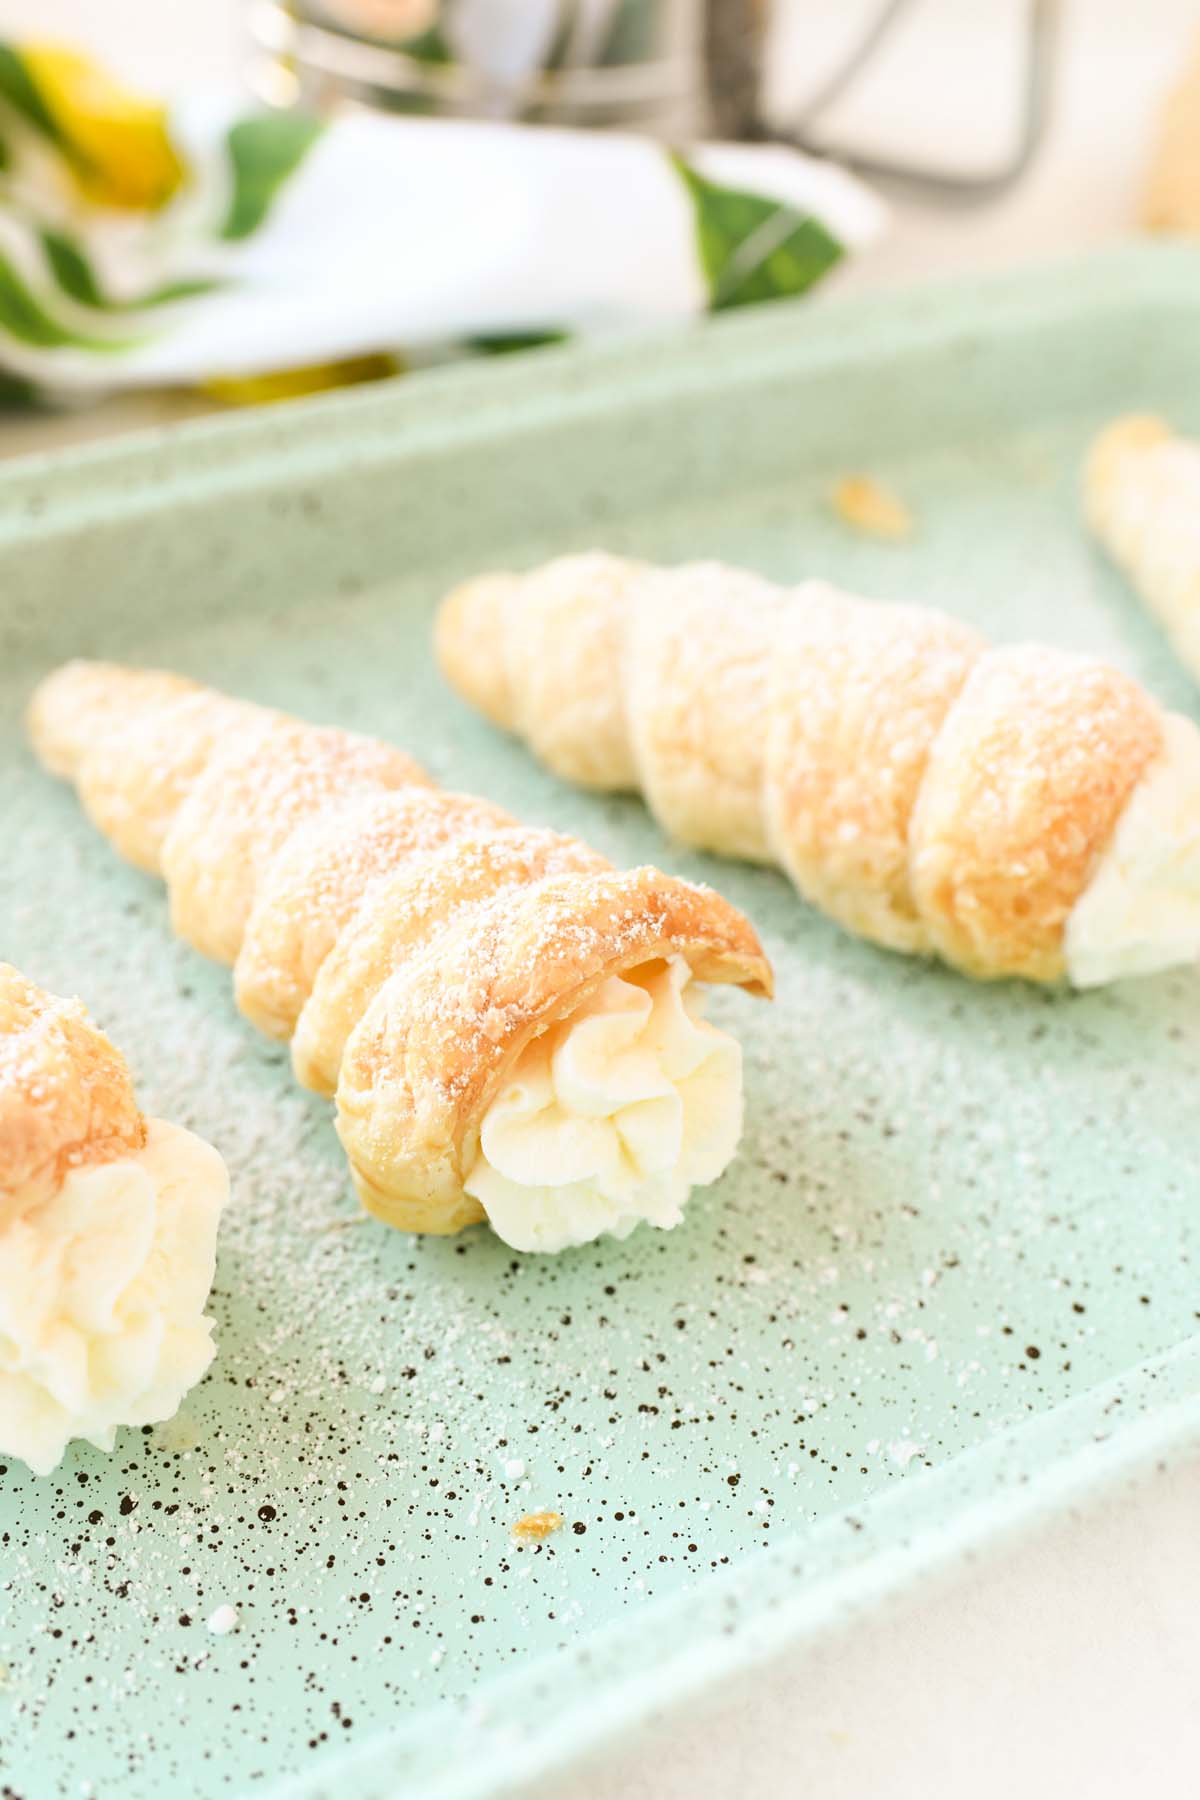 Cream filled Cream Horns with powdered sugar on a blue pan.